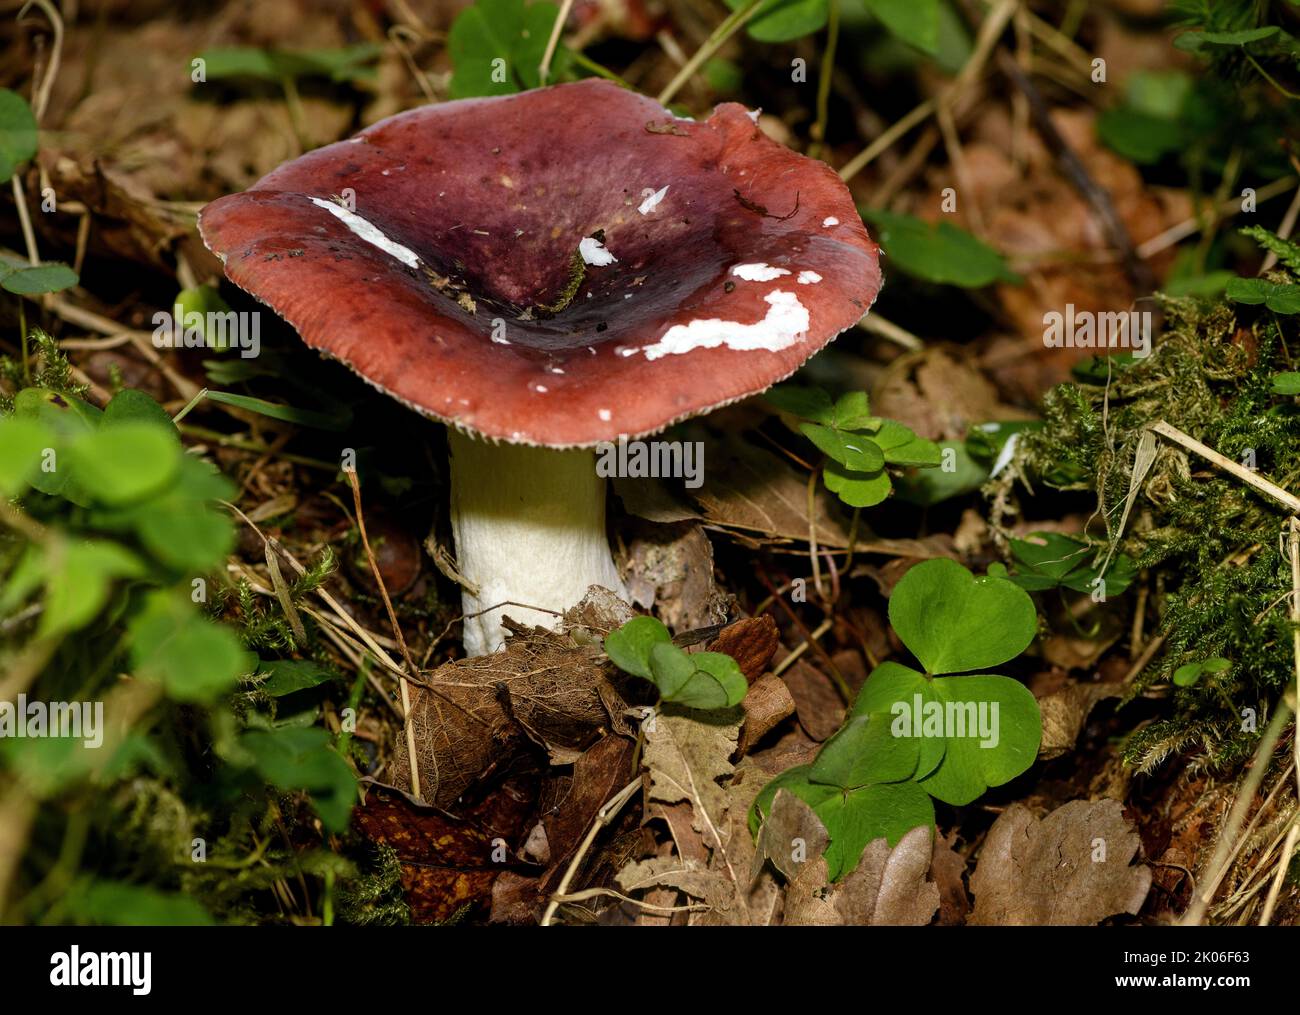 Russula sp. (possibly R. puellaris) from Hidra, south-western Norway in late August. Stock Photo